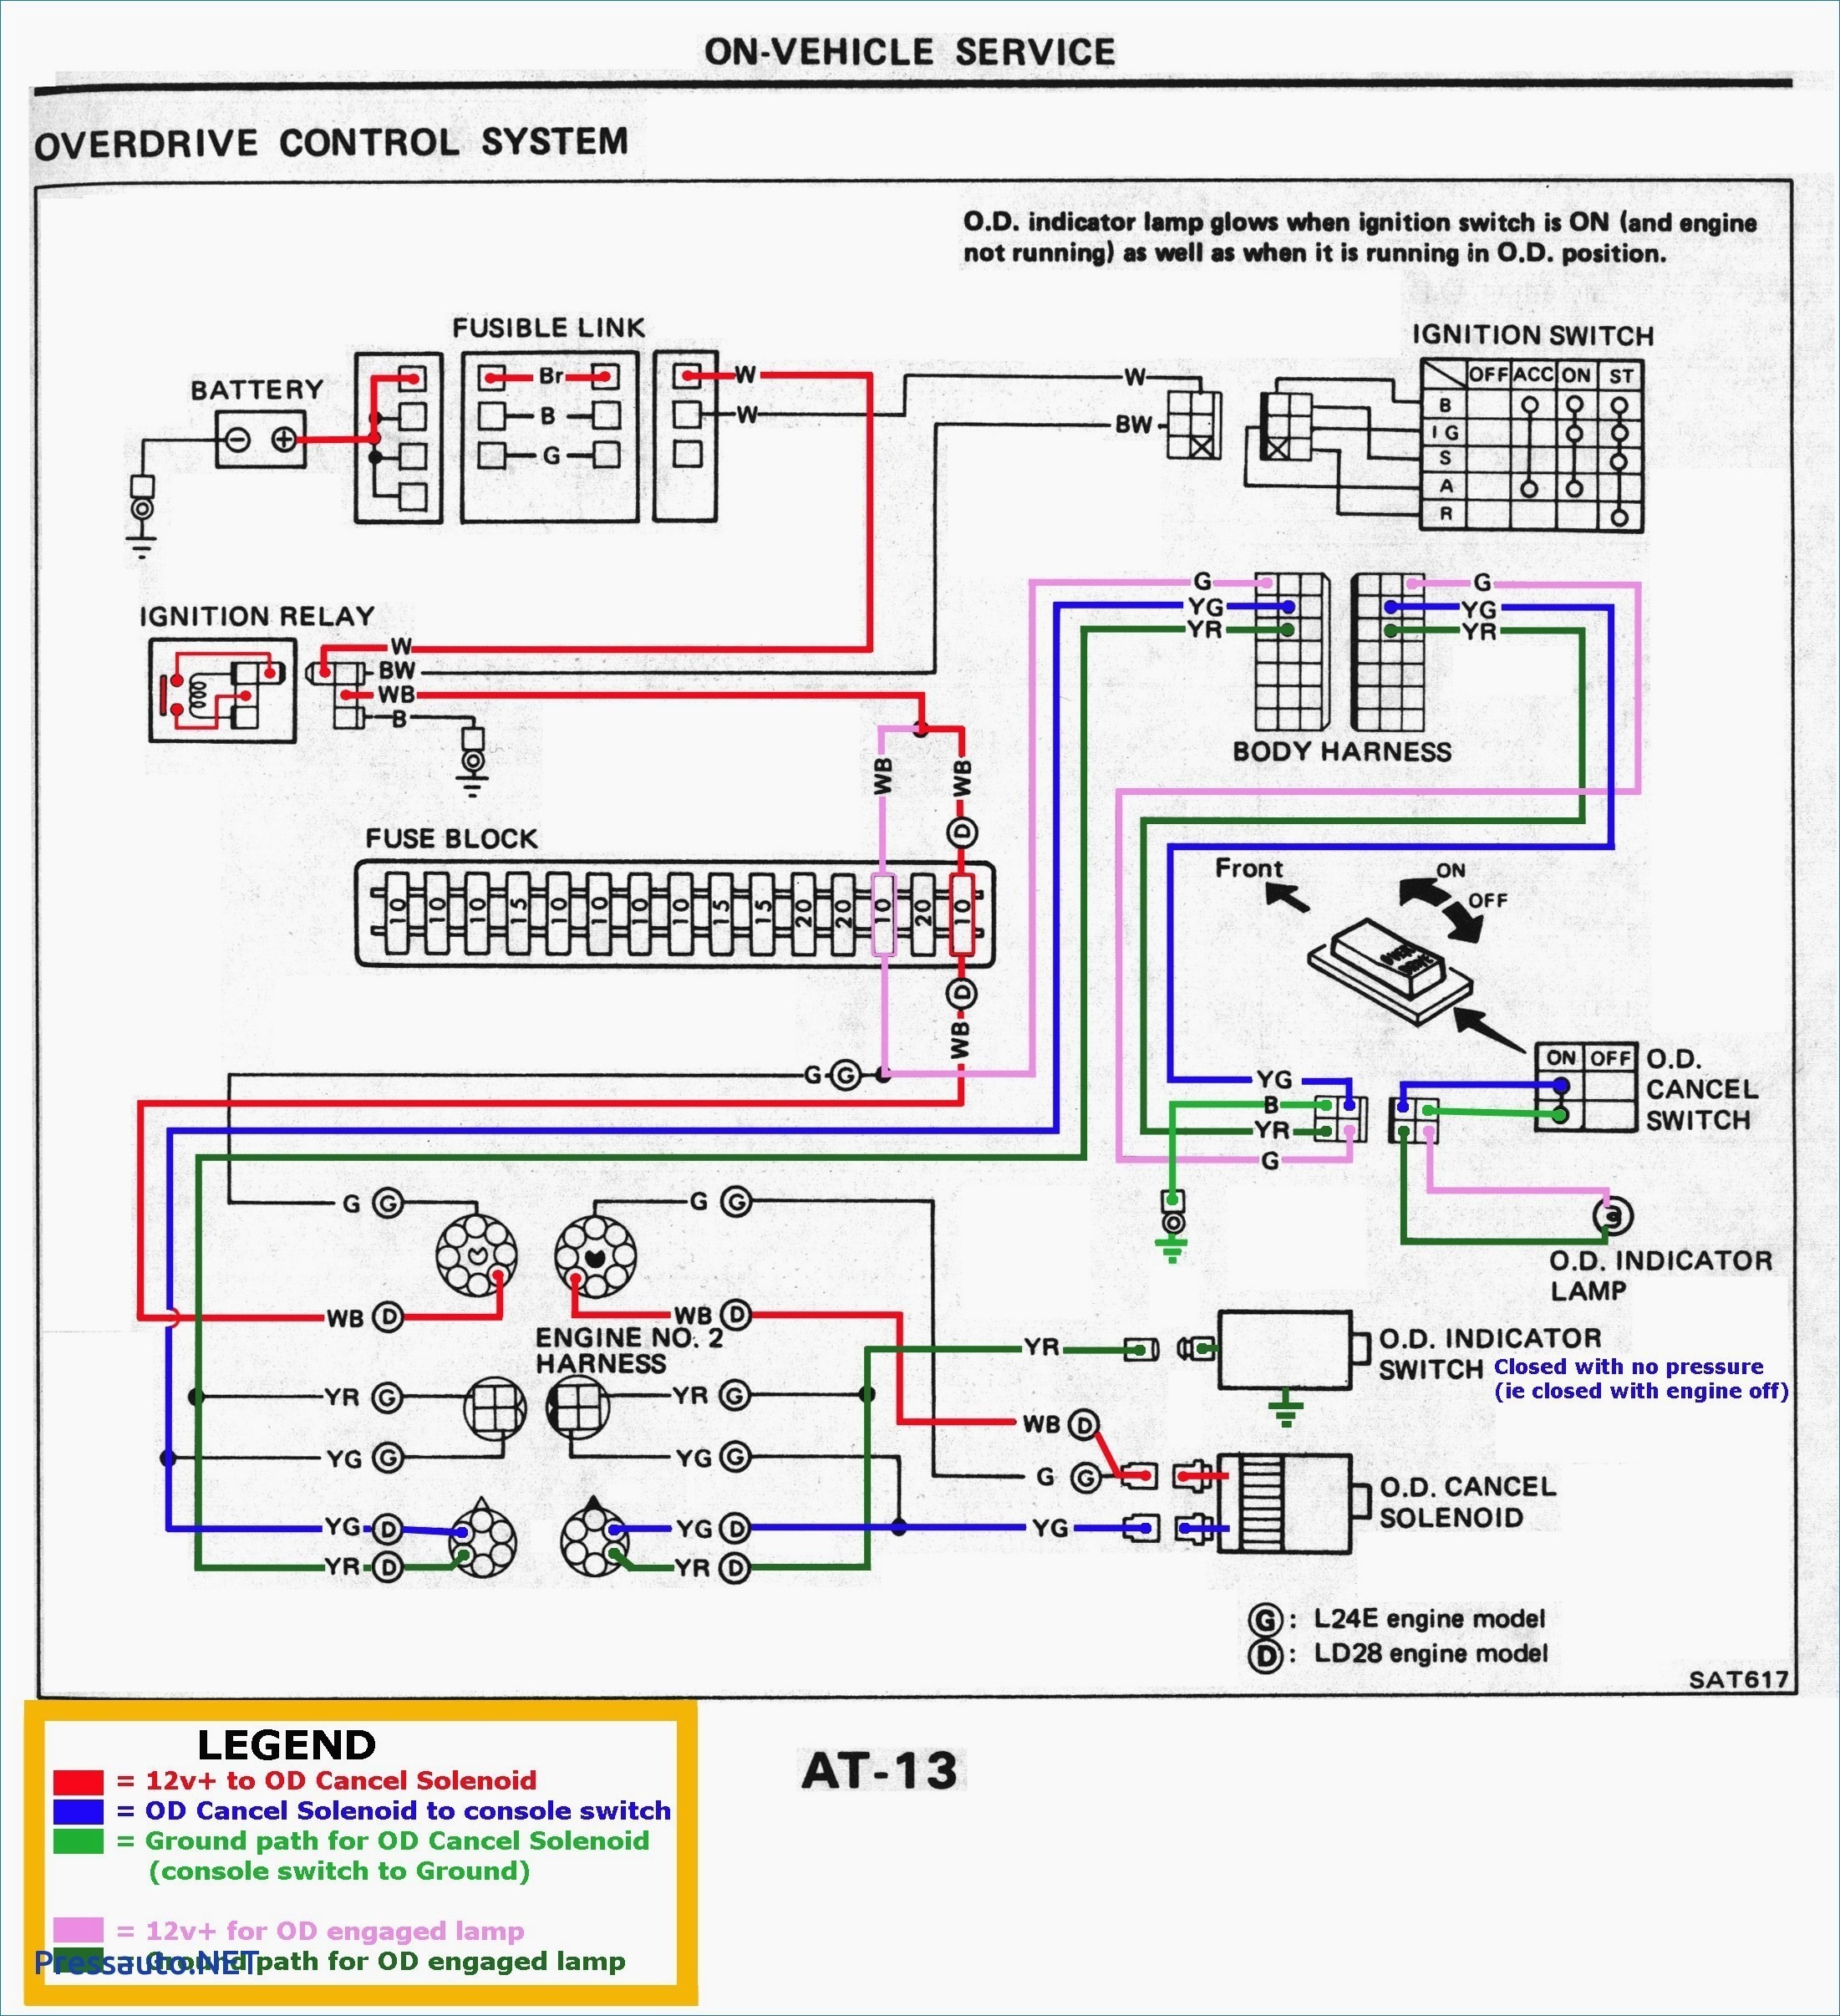 Wiring Diagram For Murray Ignition Switch New Lawn Mower At